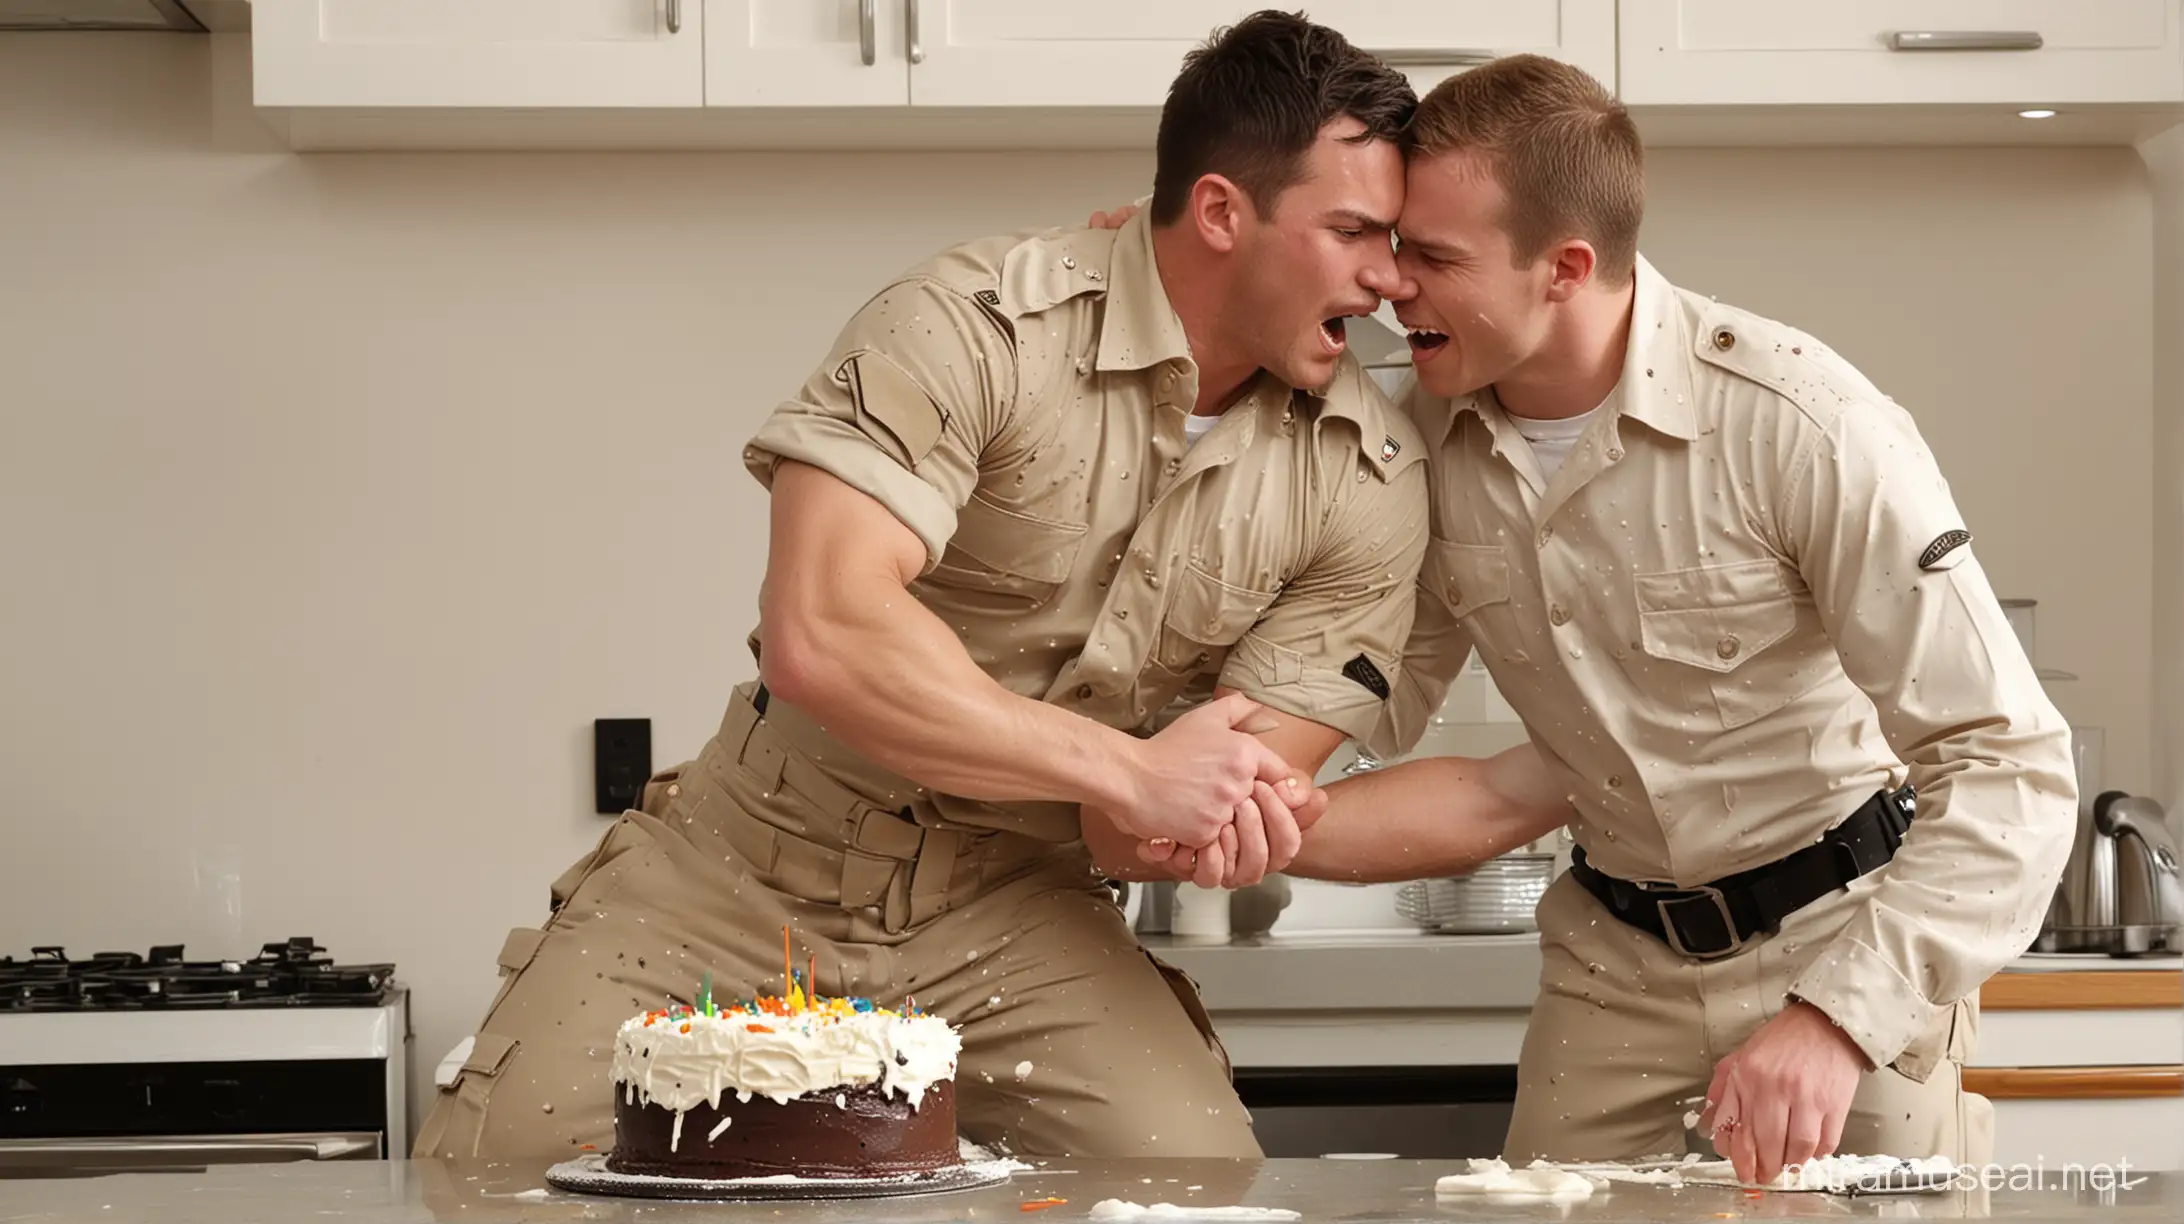 Wrestling Soldiers in Kitchen Cake Chaos